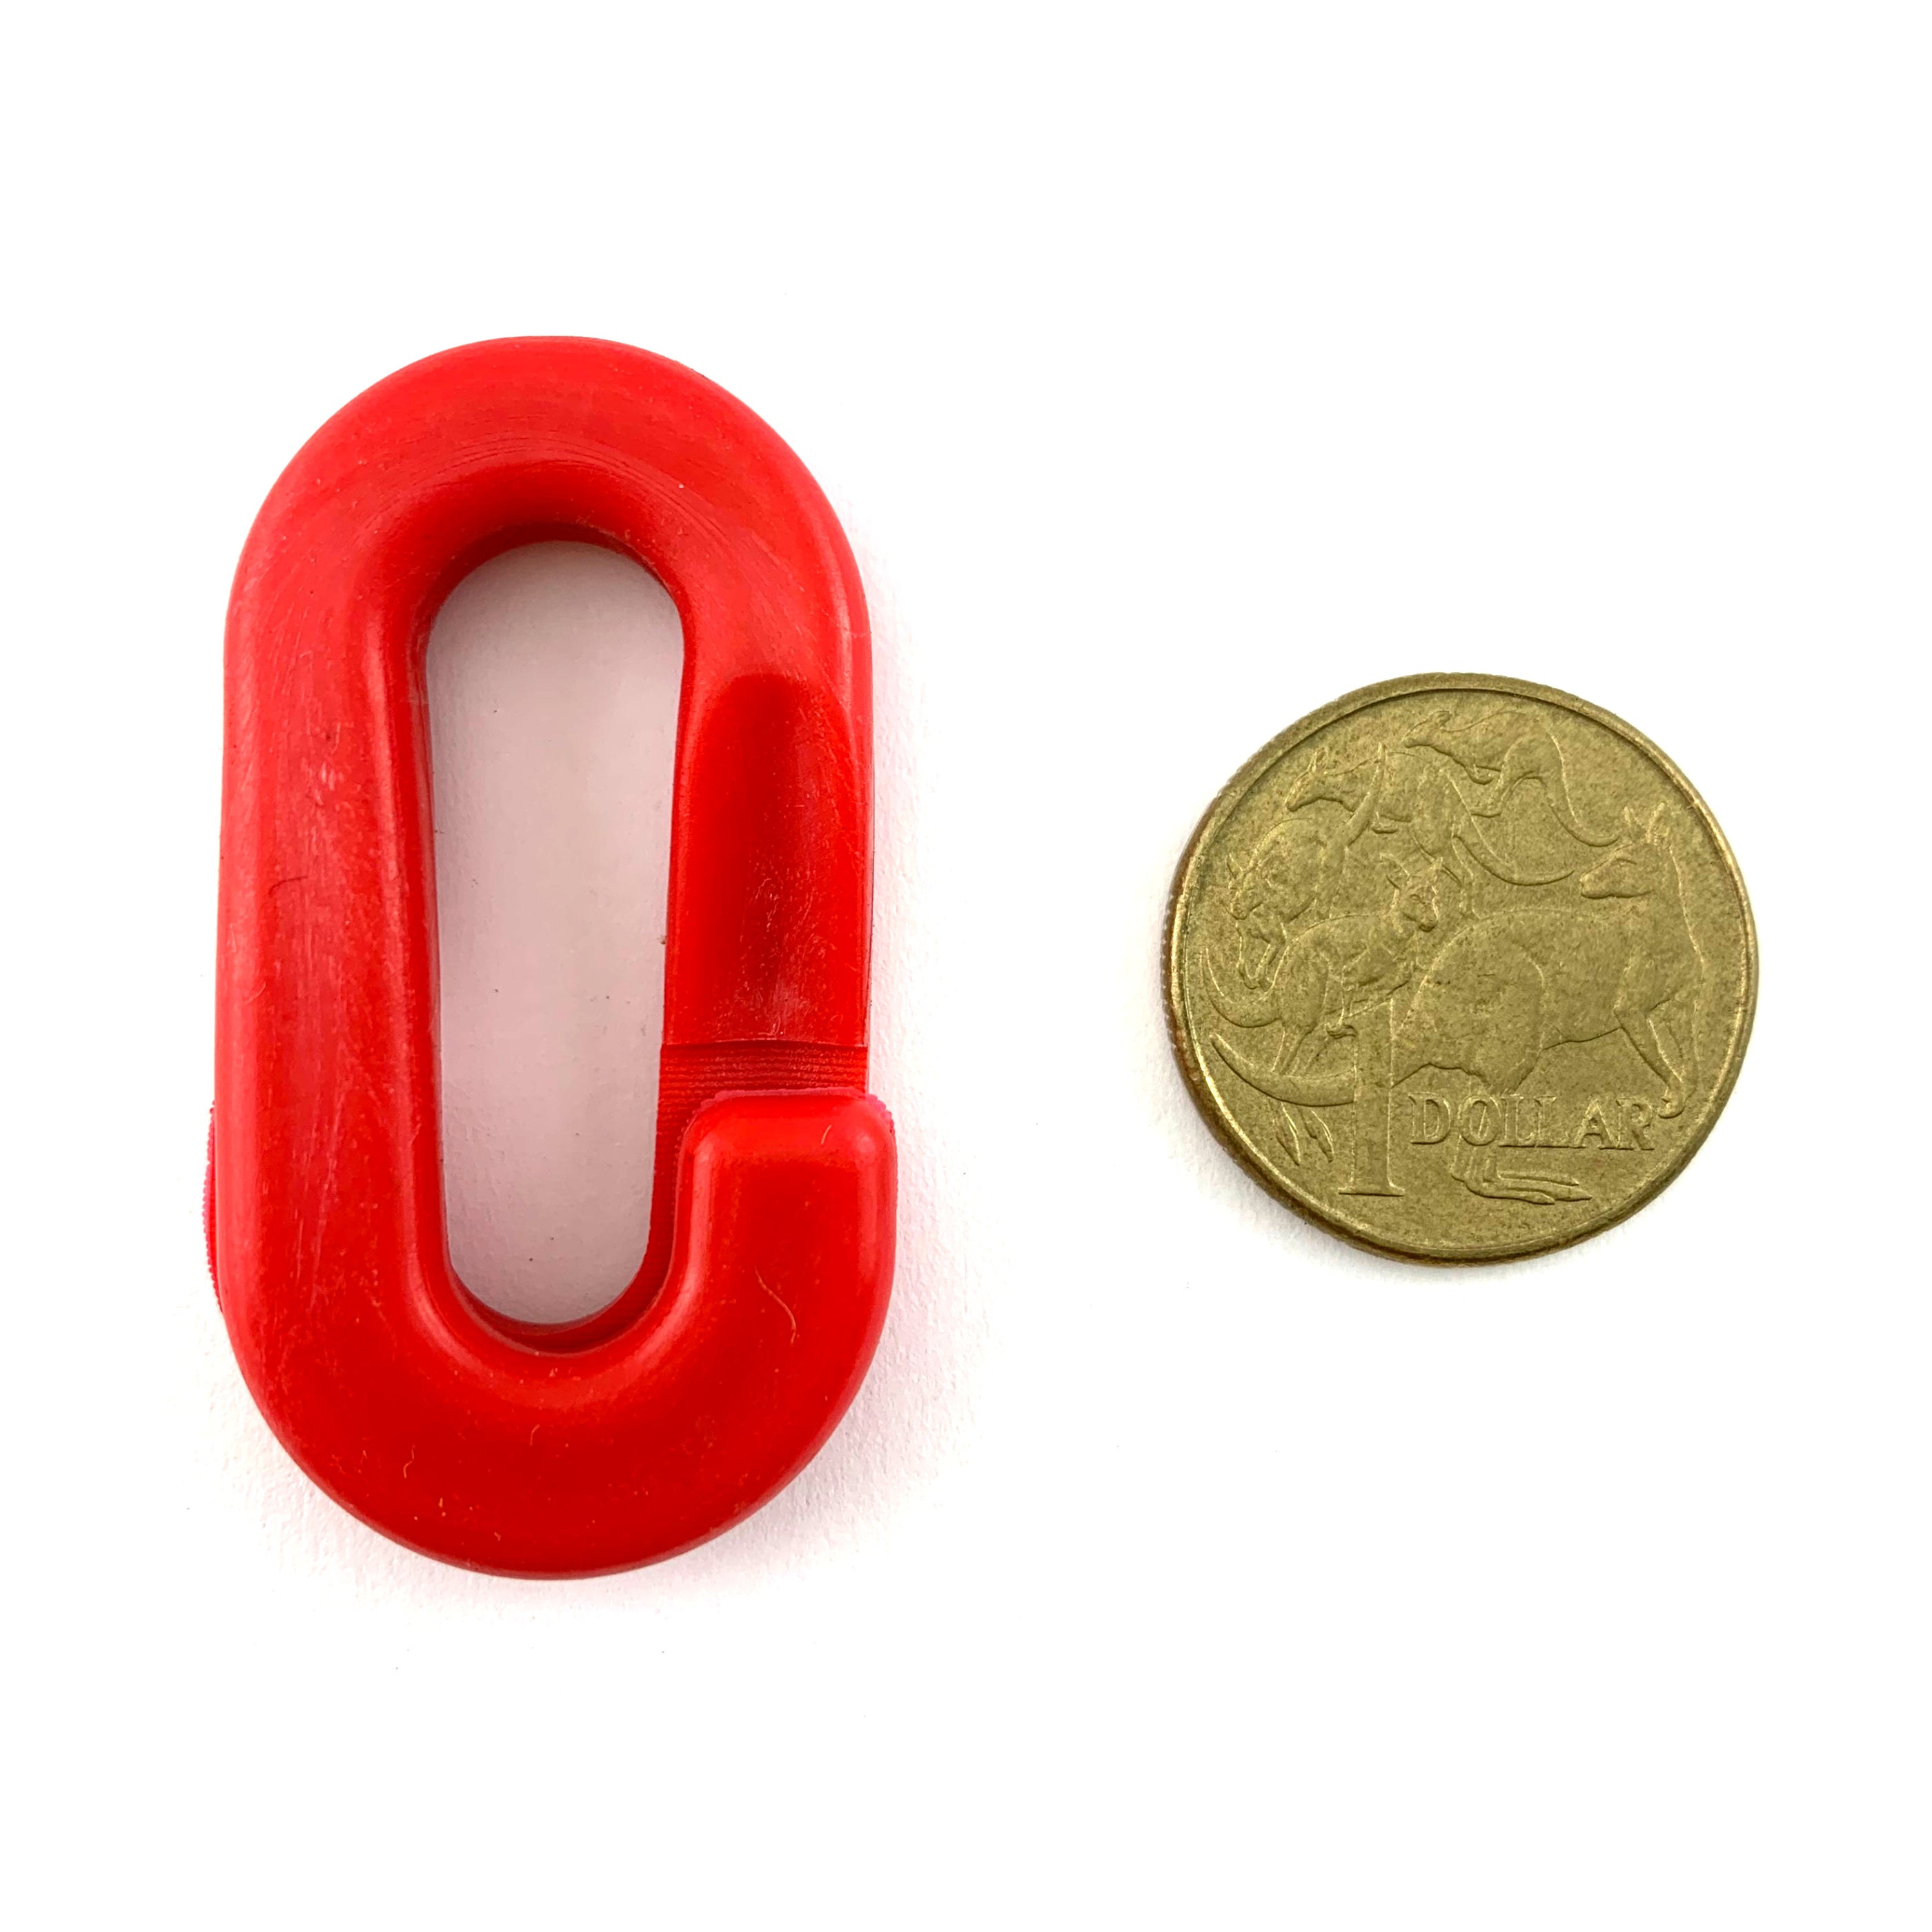 Plastic Chain Connecting Link in Red, Size: 8mm. Melbourne Australia.